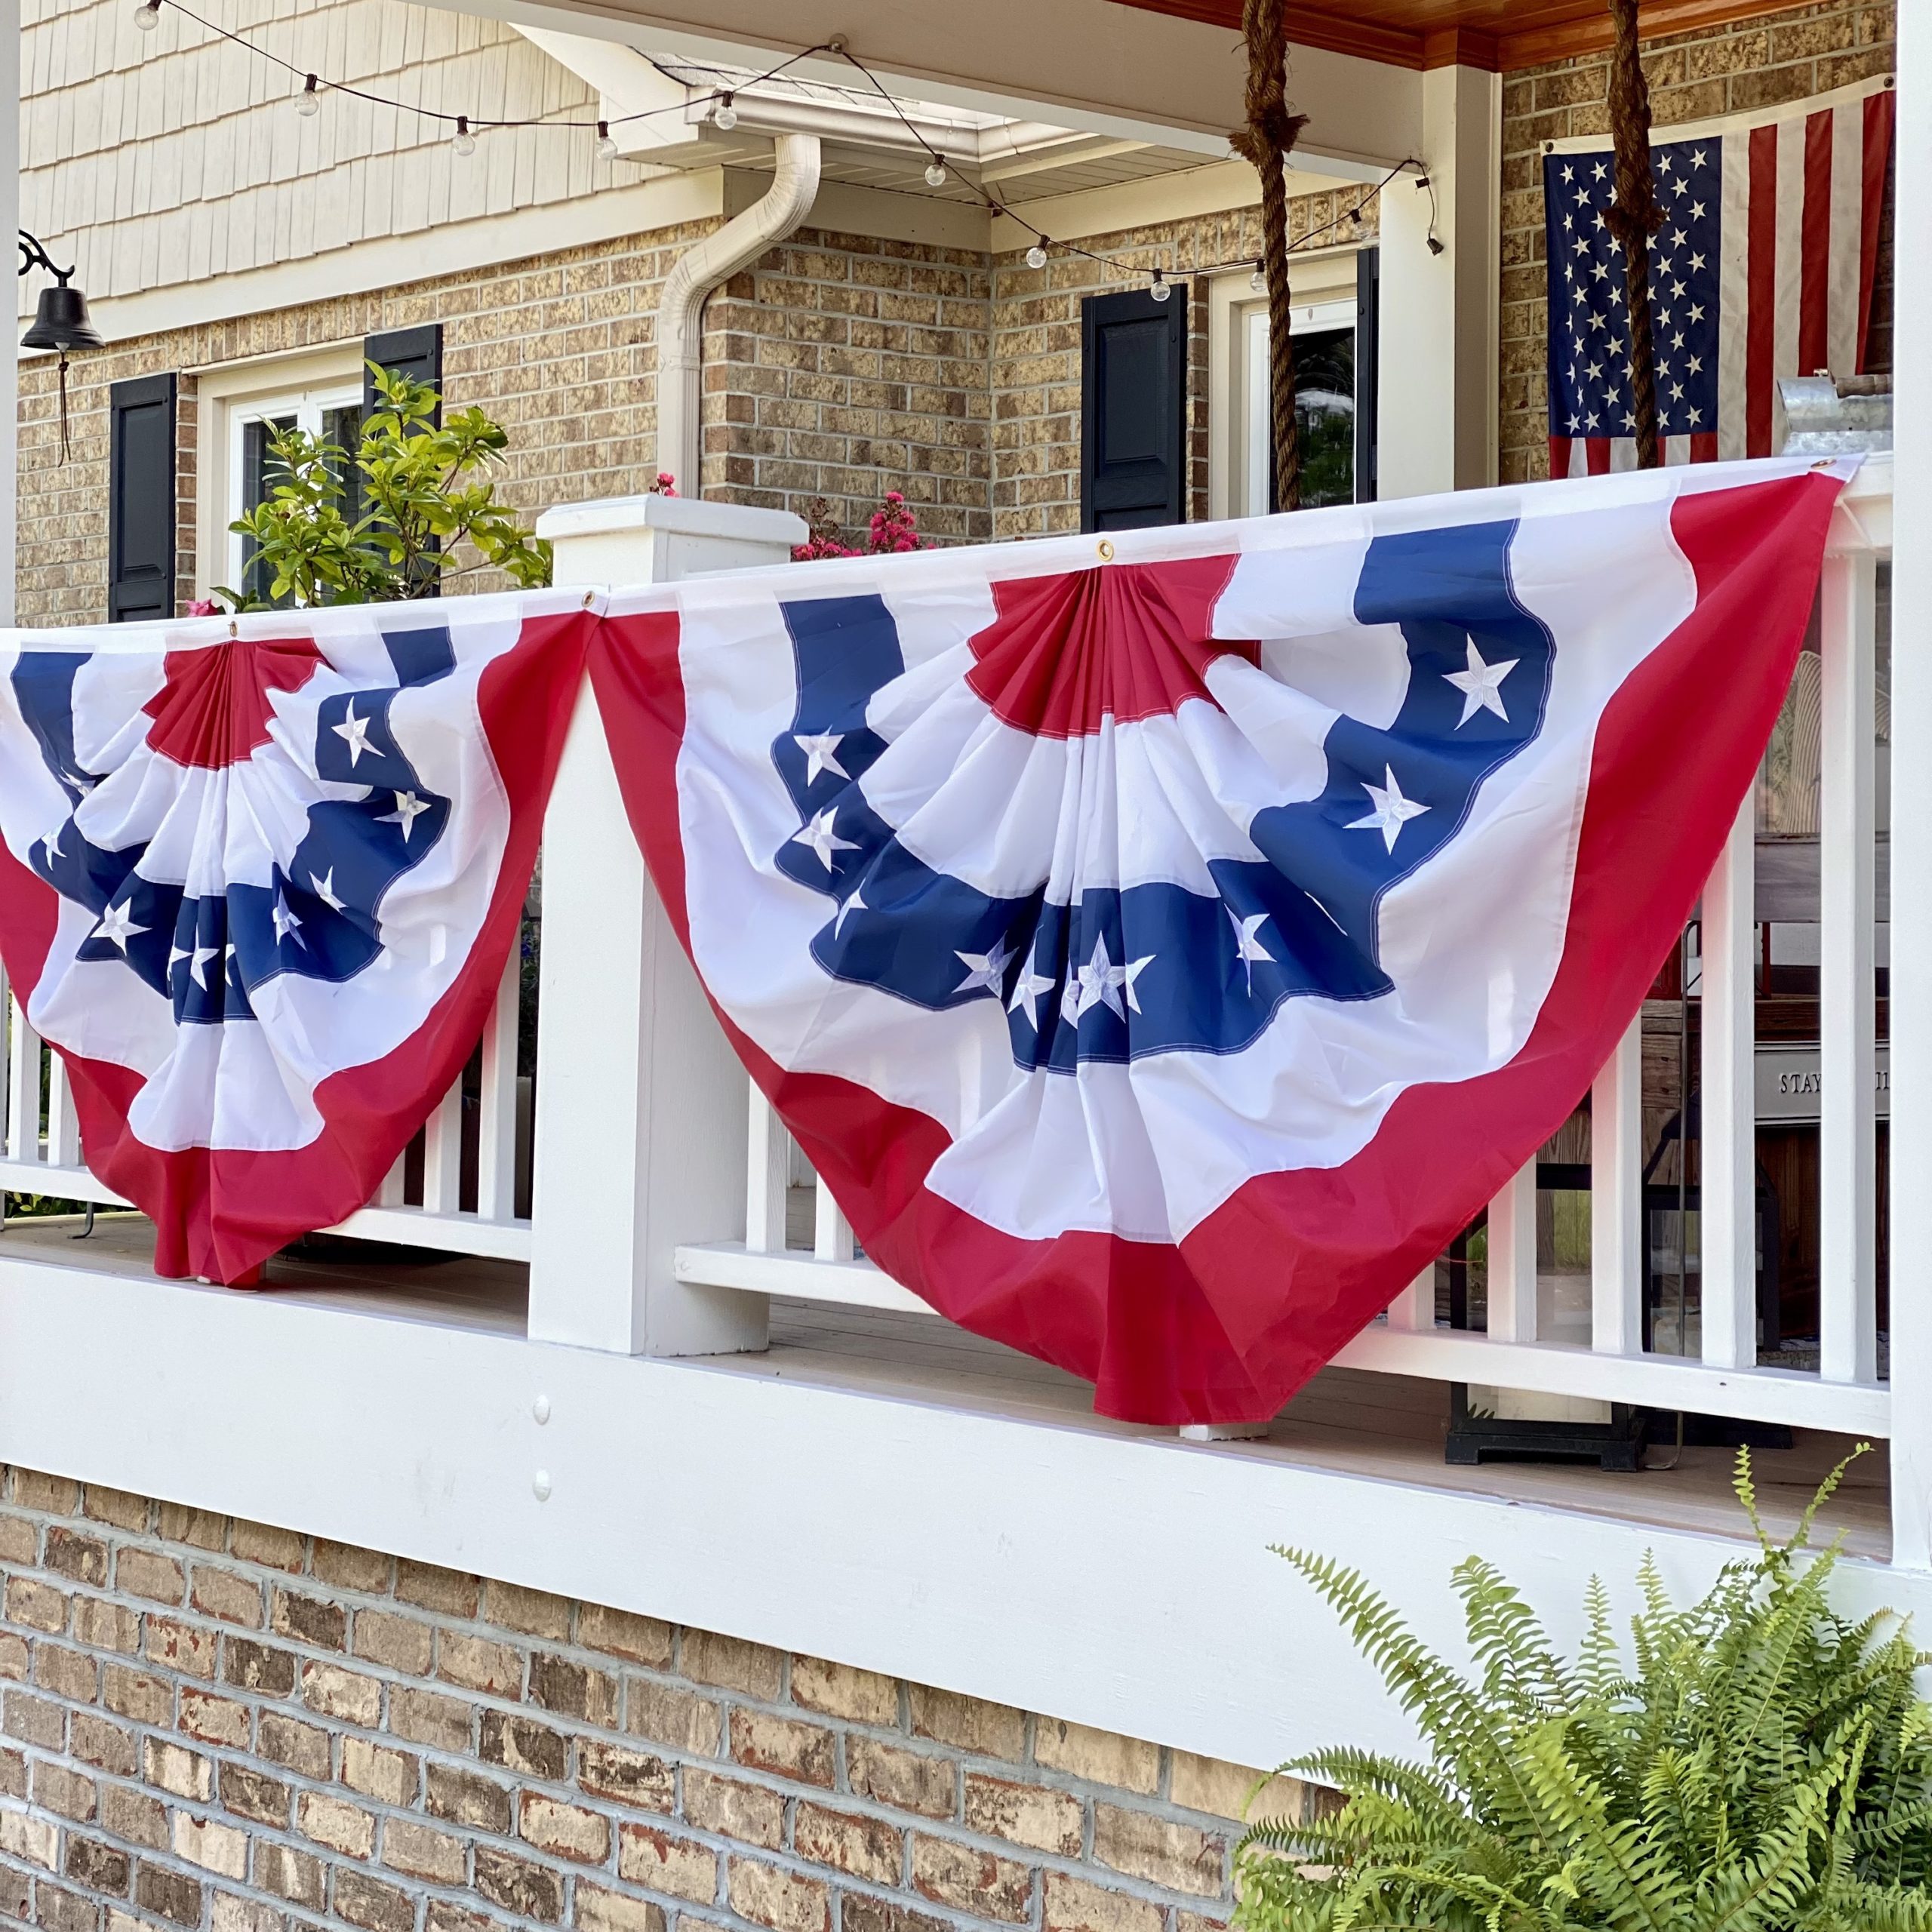 Pleated red, white, and blue bunting on the front porch railings. 